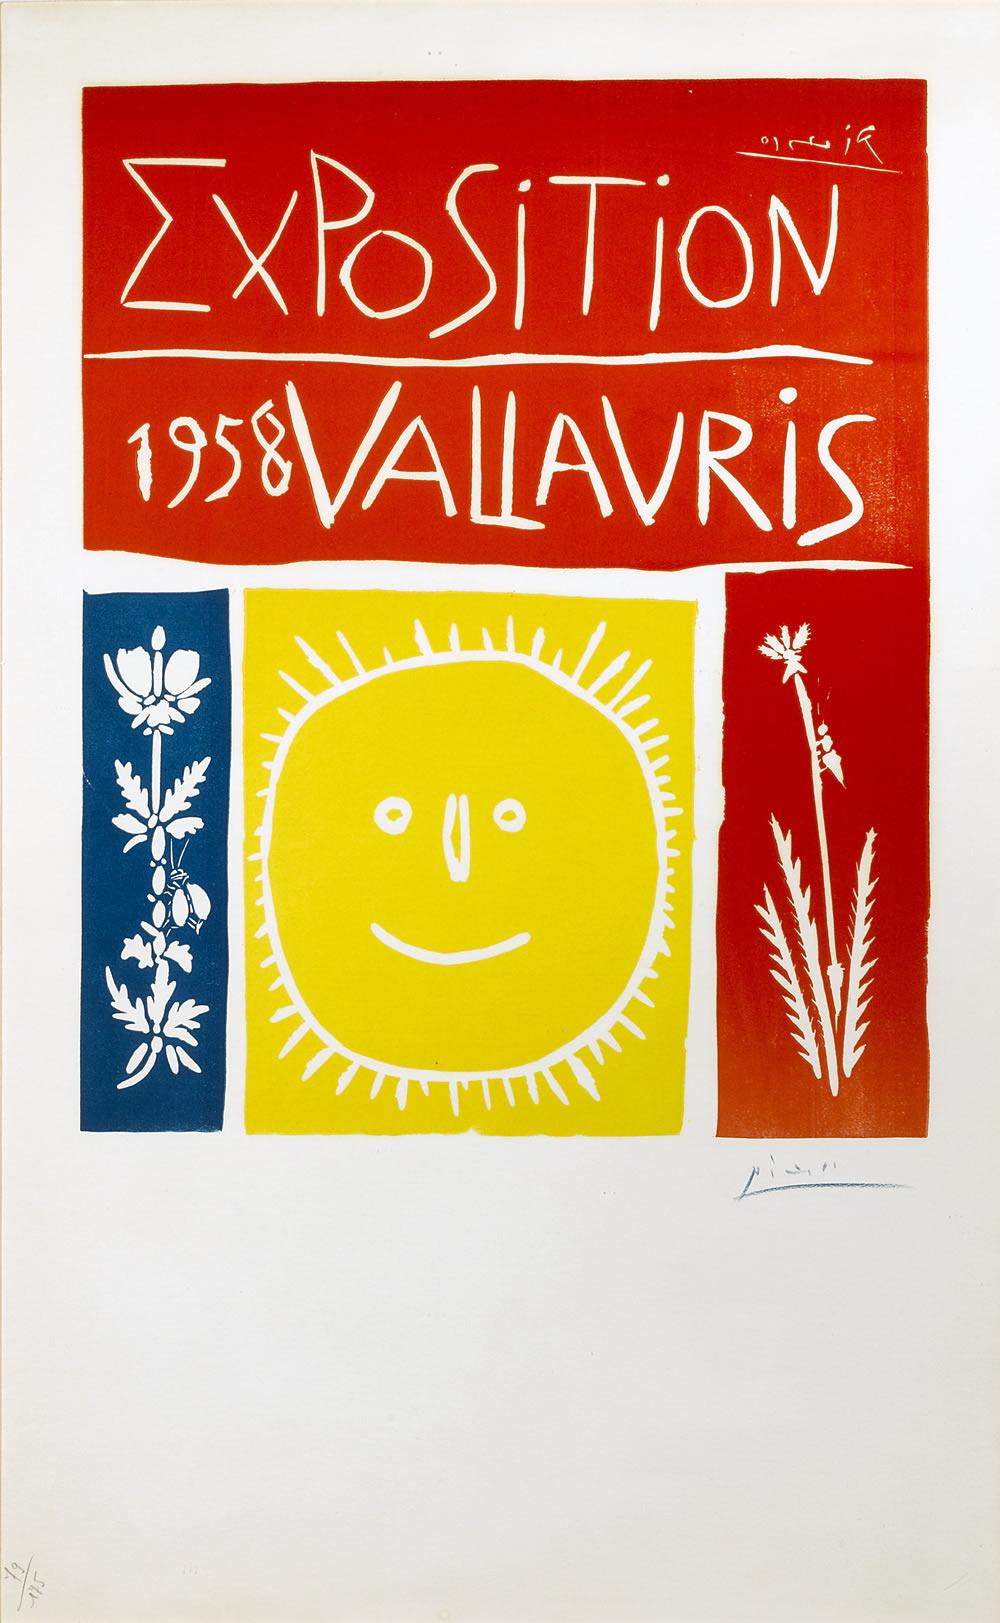 Vallauris 1958 Exposition - Print by Pablo Picasso